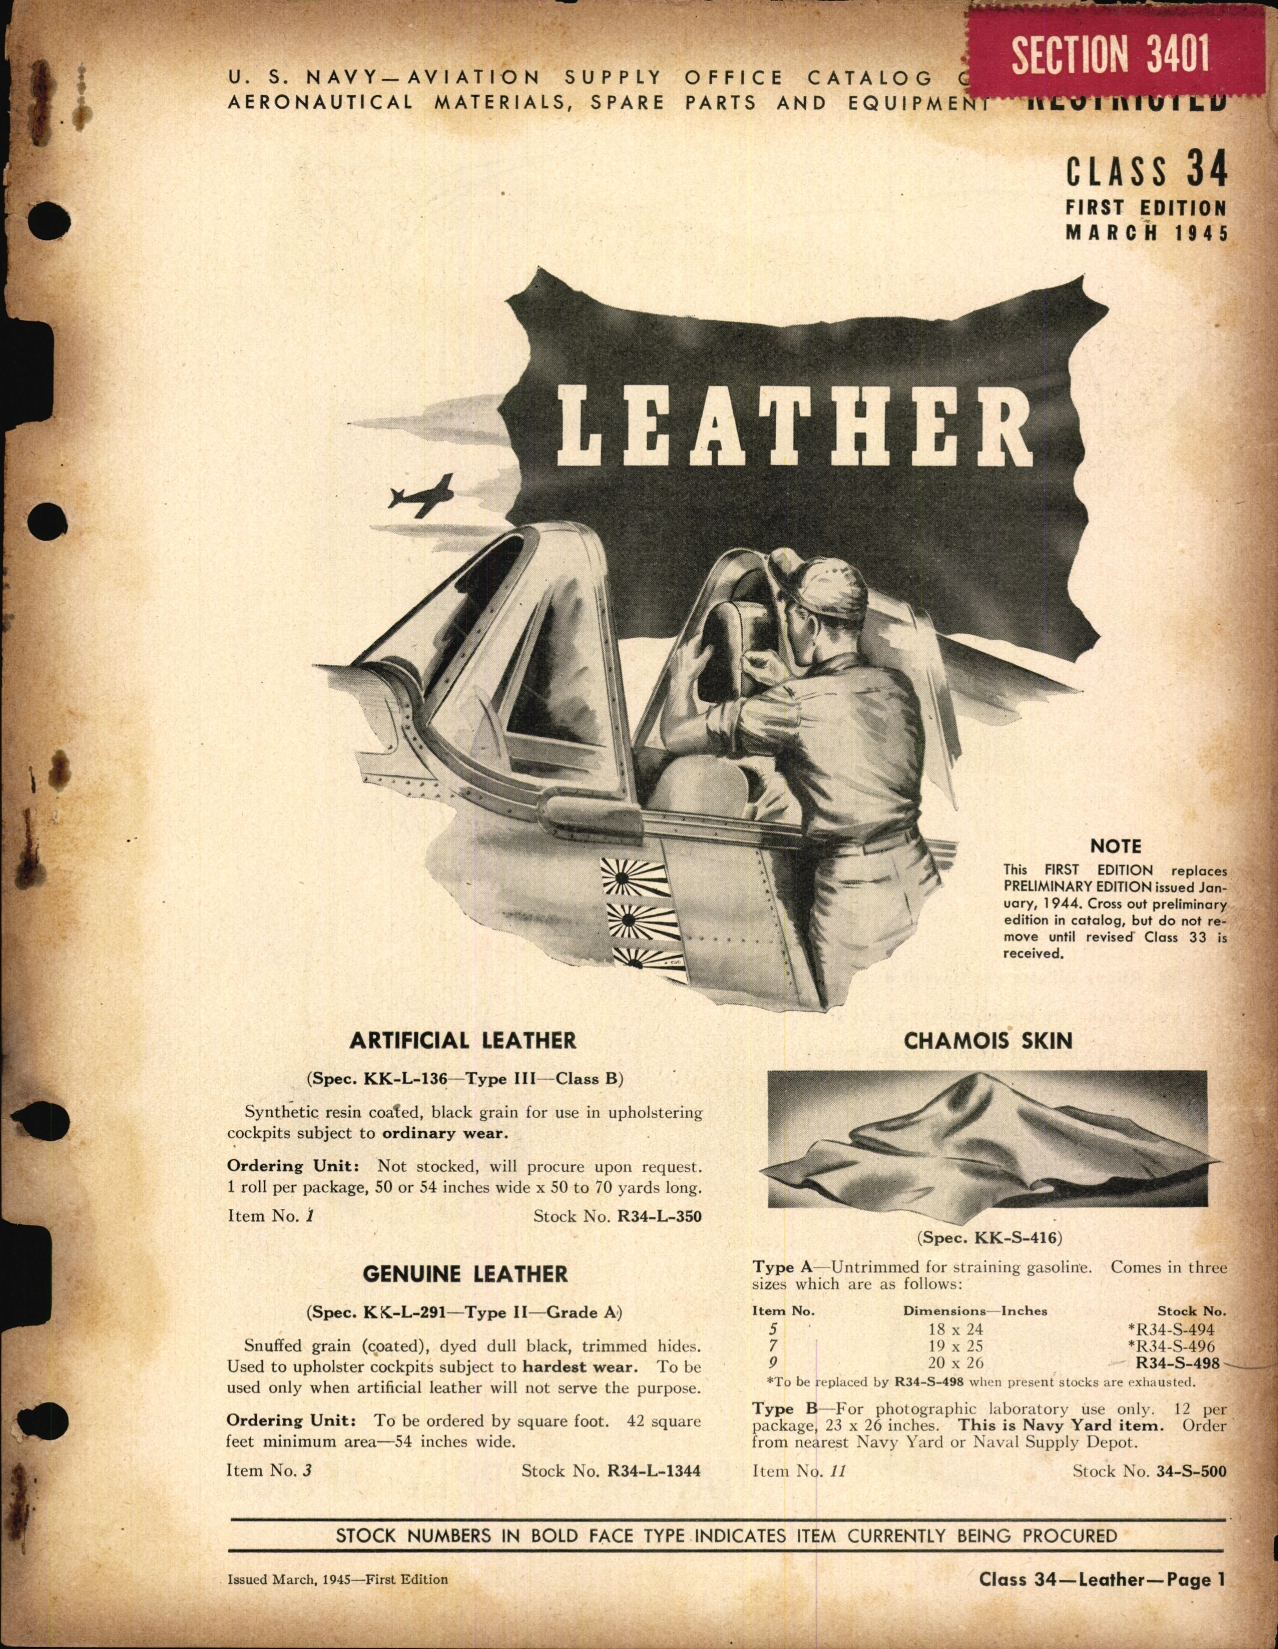 Sample page 1 from AirCorps Library document: Leather